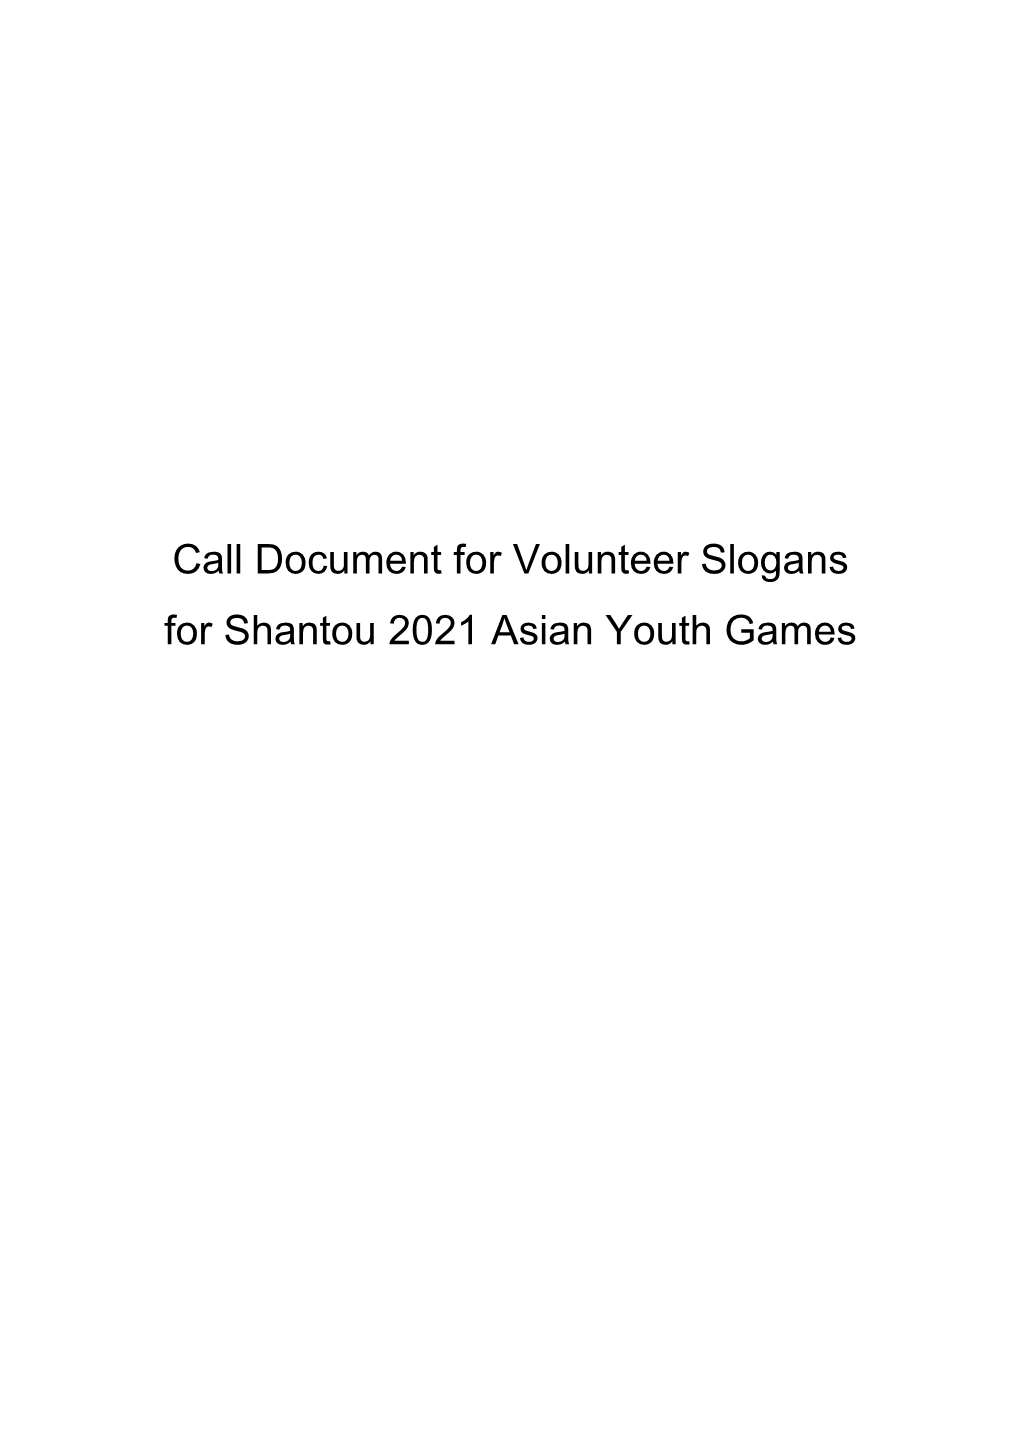 Call Document for Volunteer Slogans for Shantou 2021 Asian Youth Games